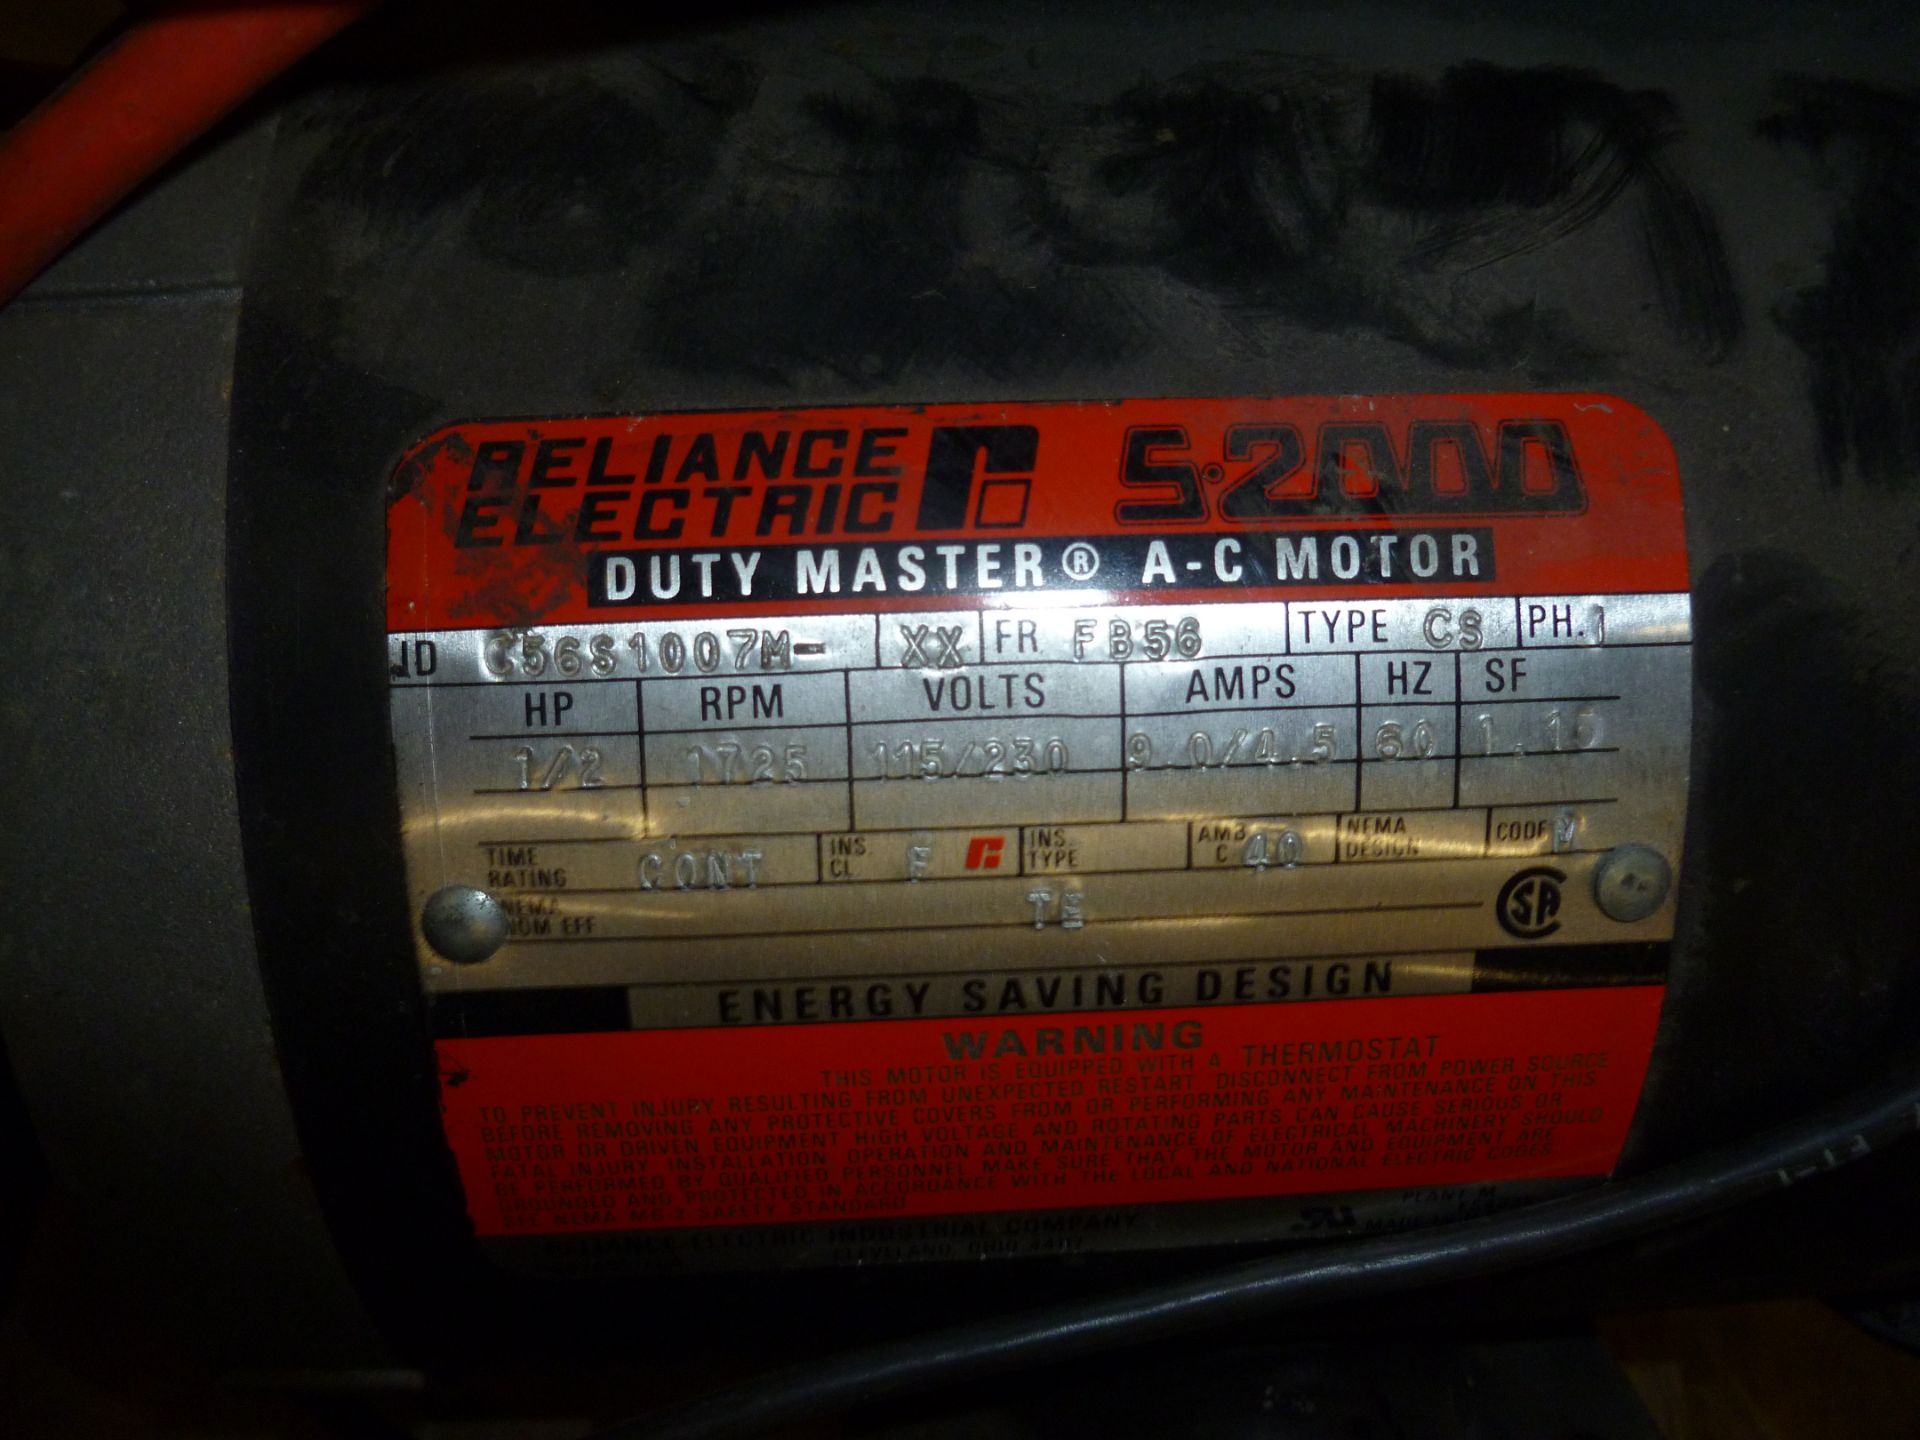 RELIANCE ELECTRIC C56S1007M-XX 1 PH 1/2 HP 1725 RPM 115/230 V DUTY MASTER A-C MOTOR TESTED AND - Image 5 of 6